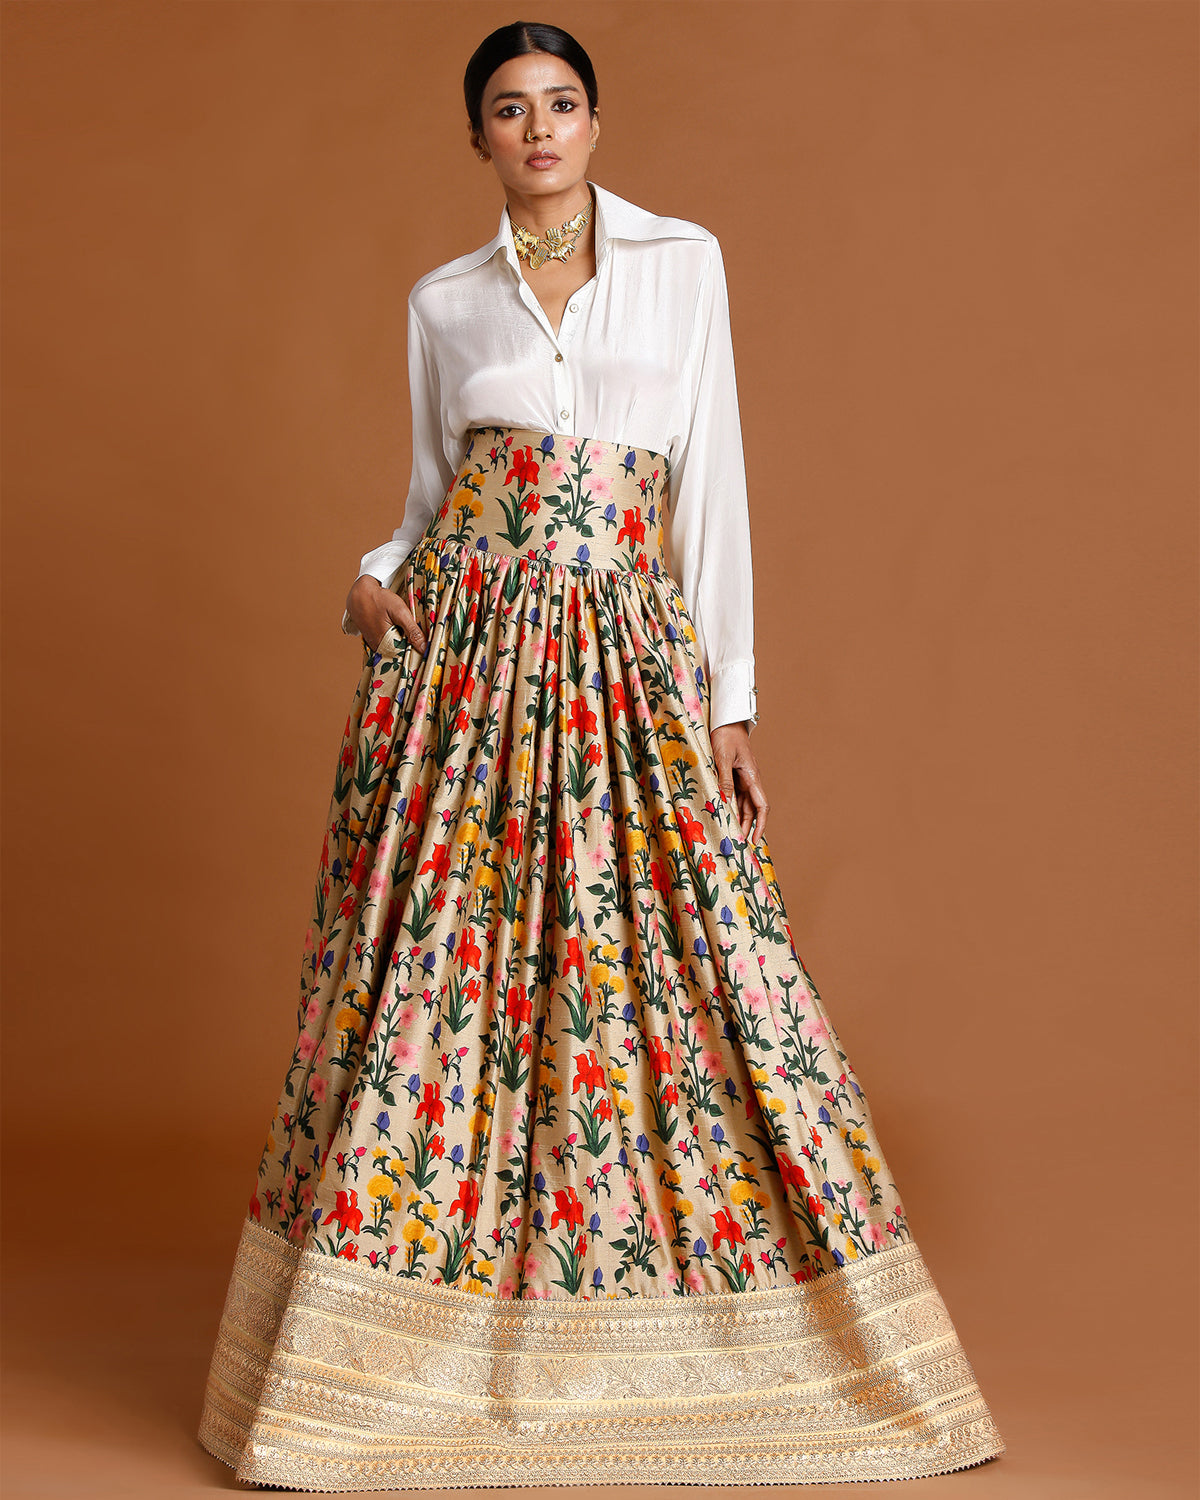 Autumb Bouquet Lehenga with White Corset Top by House of Masaba at KYNAH